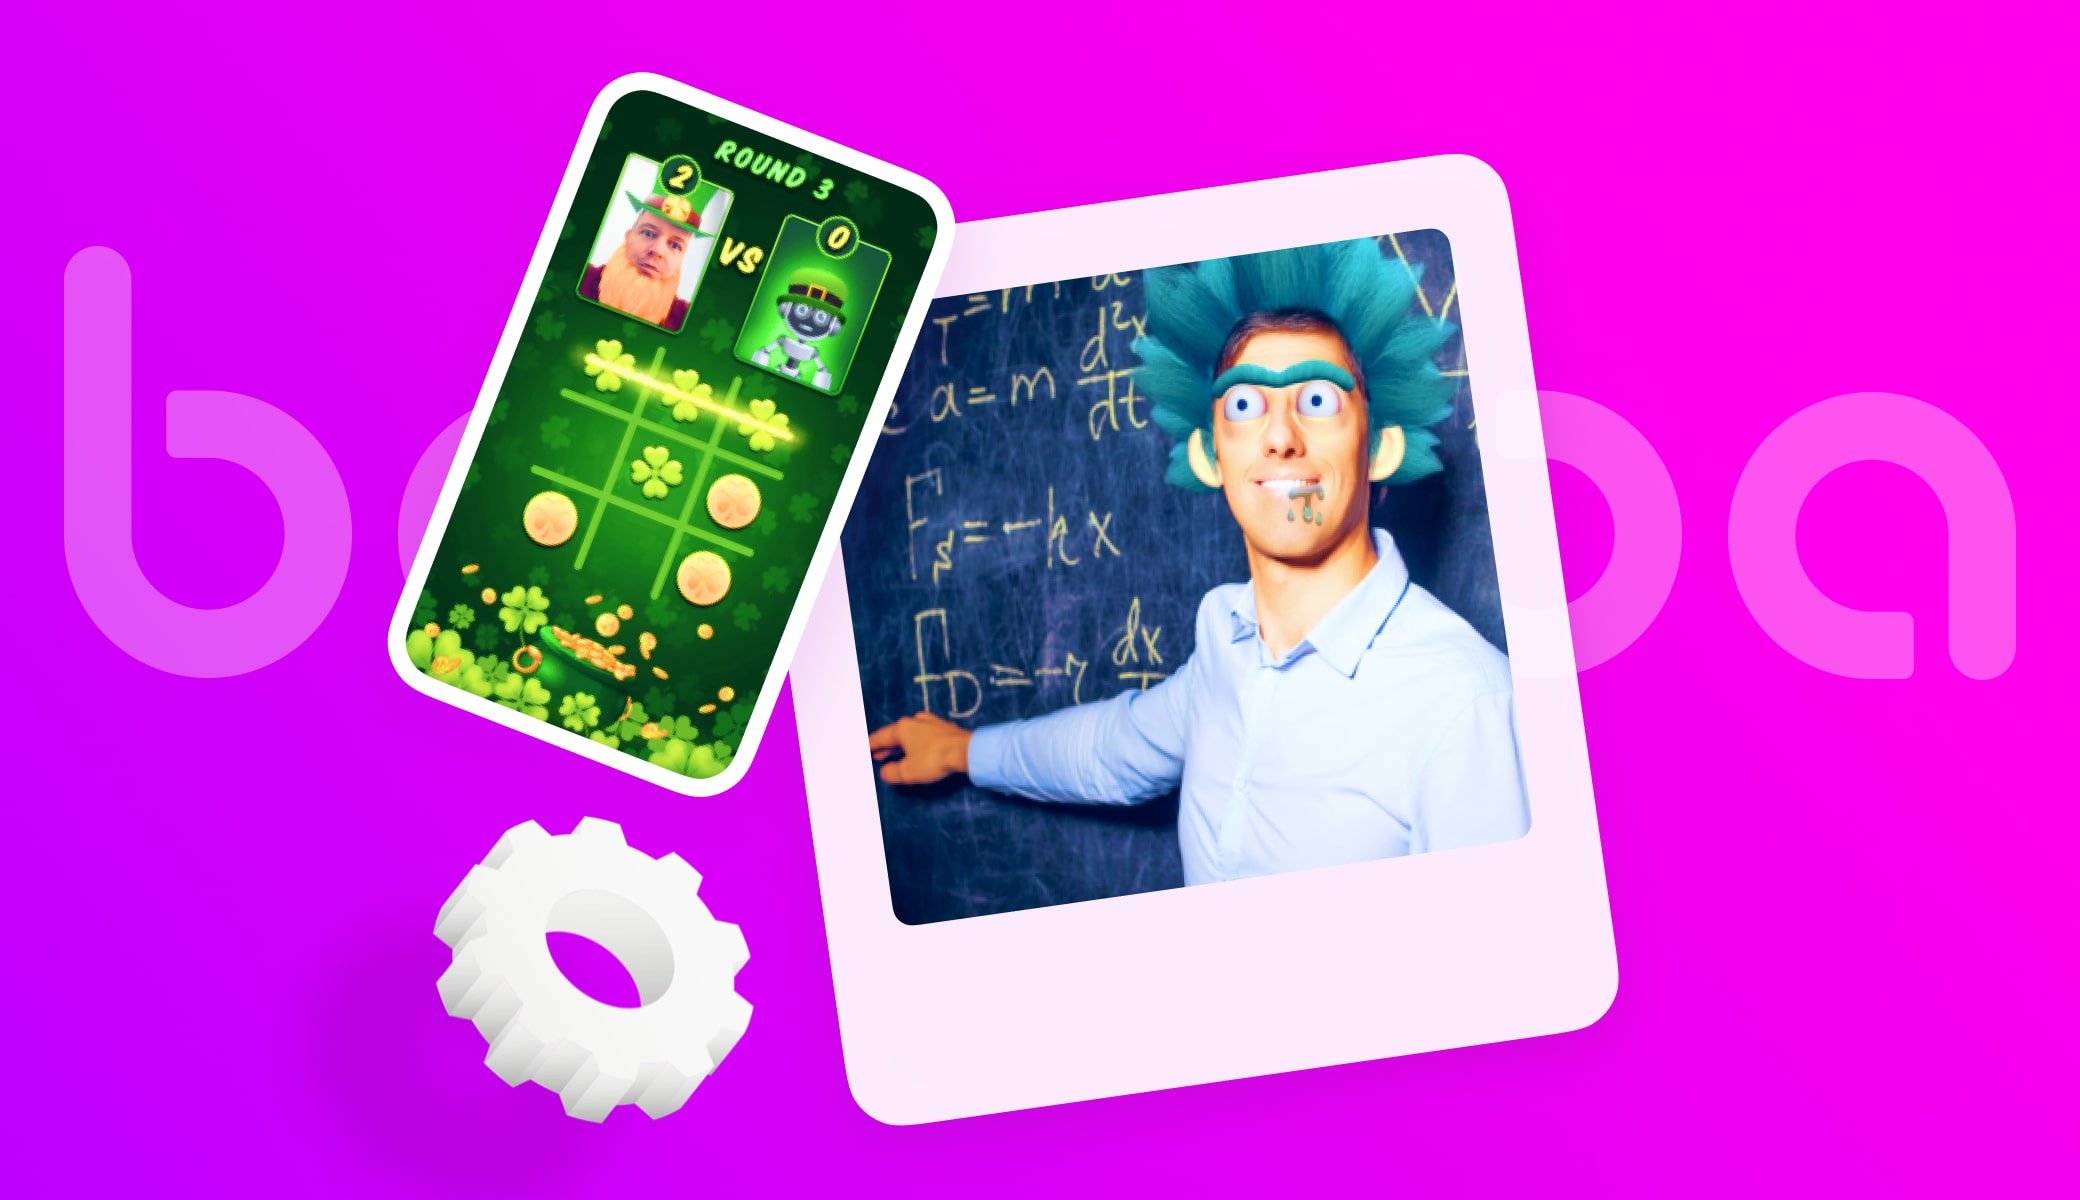 Gamification and Augmented Reality learning